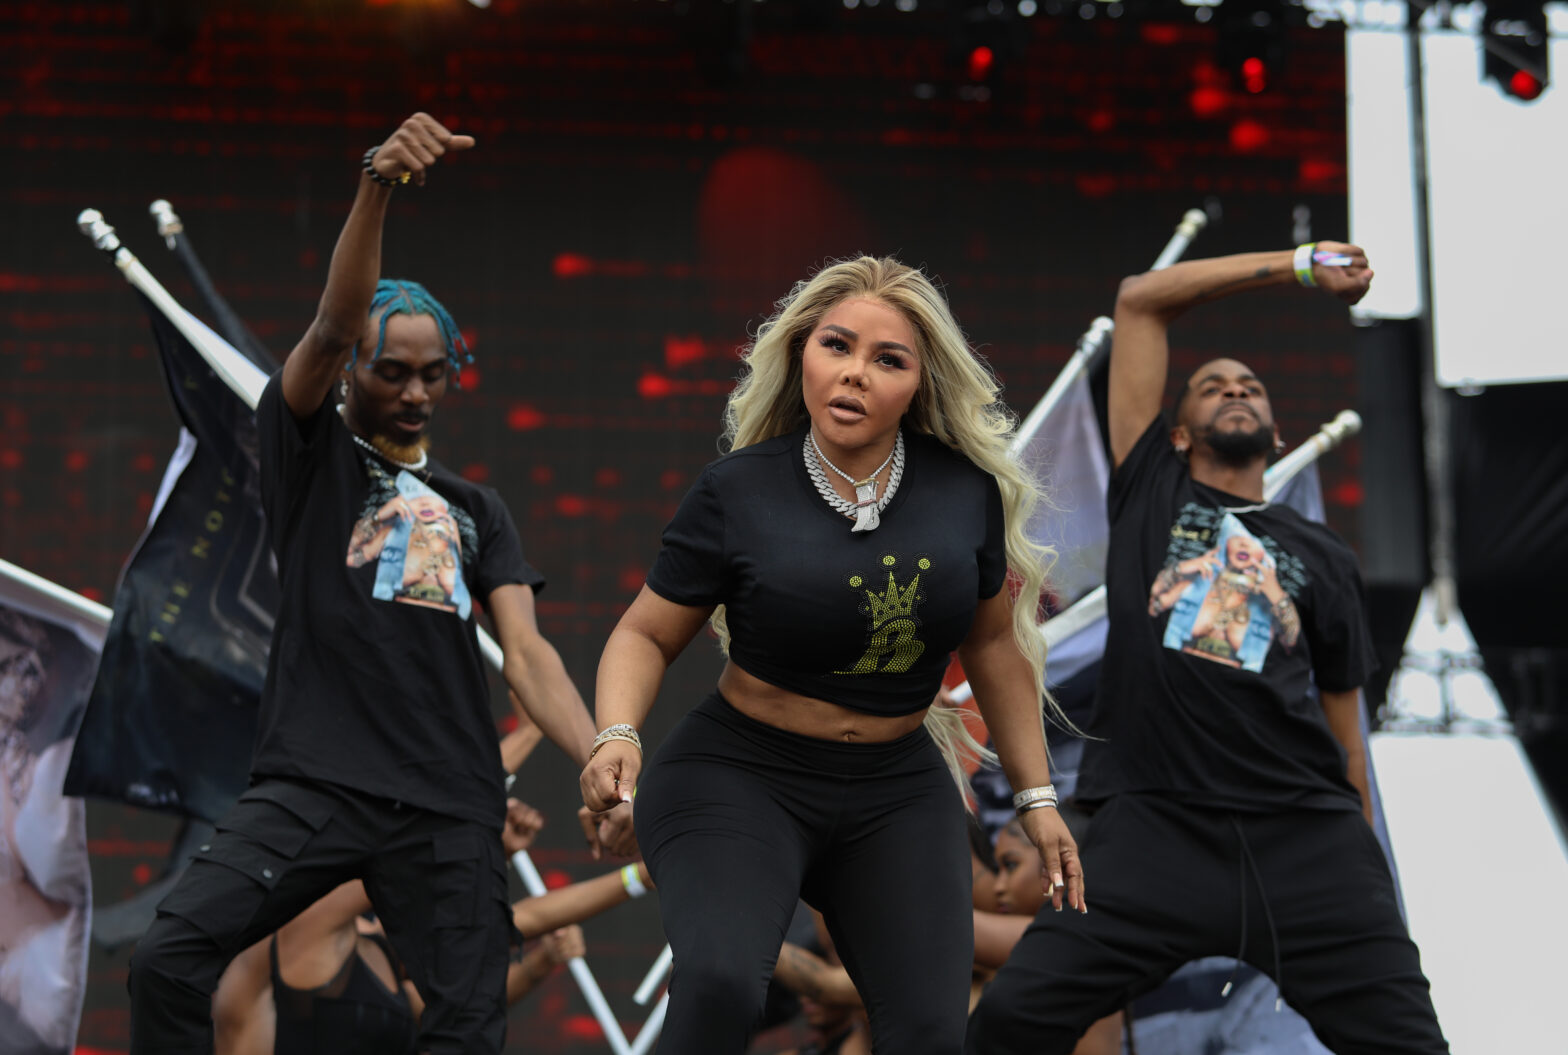 lil' kim performing on stage with two dancers behind her